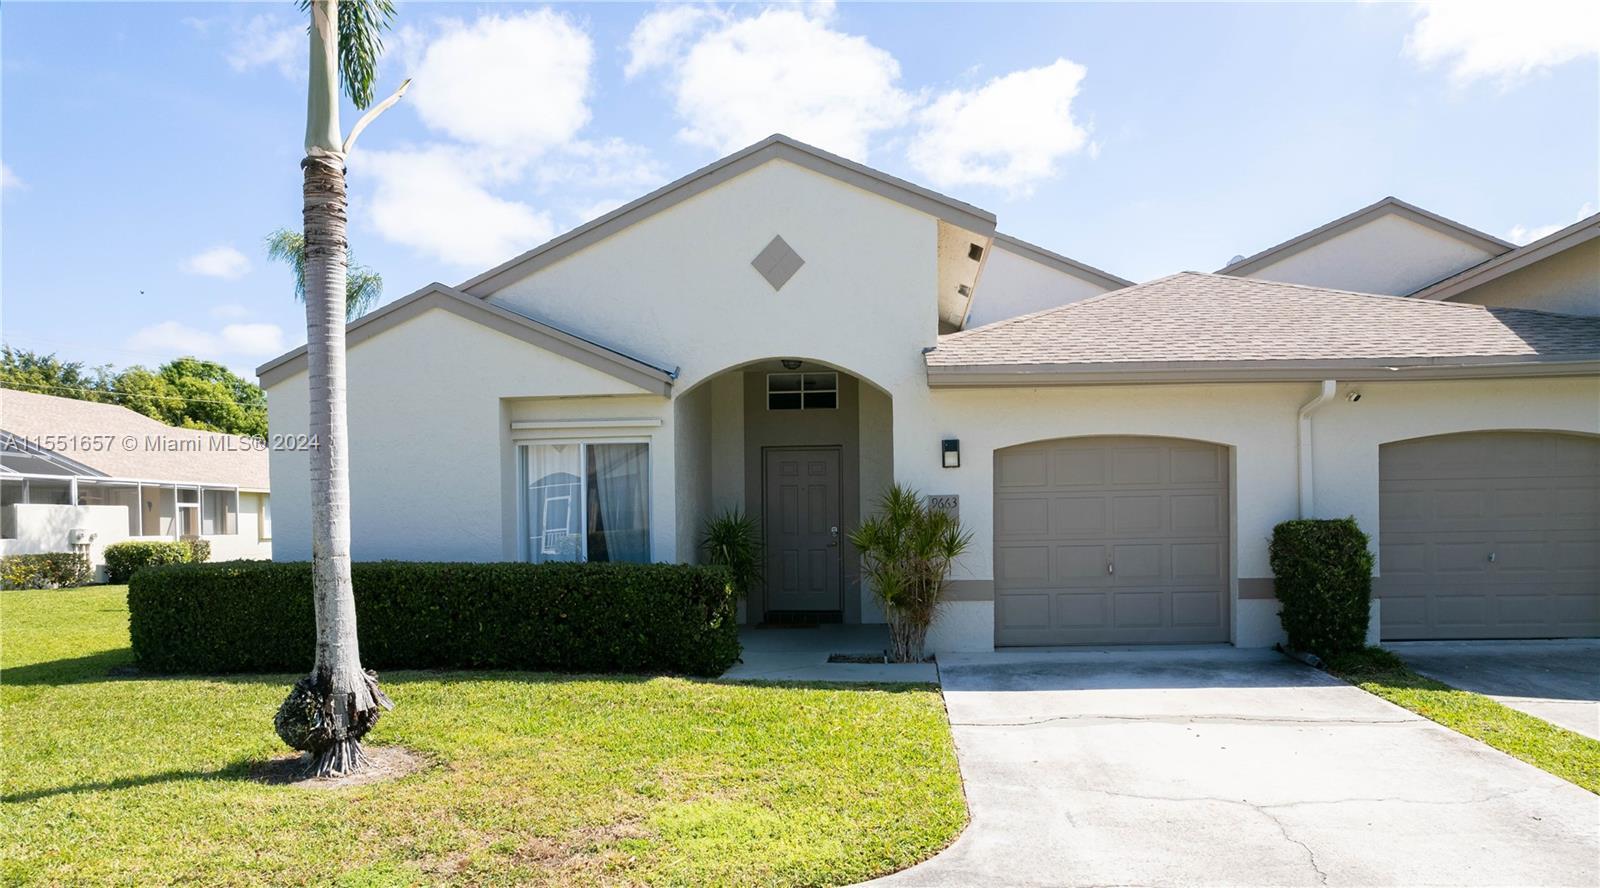 This Beautiful 2/2 villa in the desirable Boca Gardens community is one to see! It is very spacious 